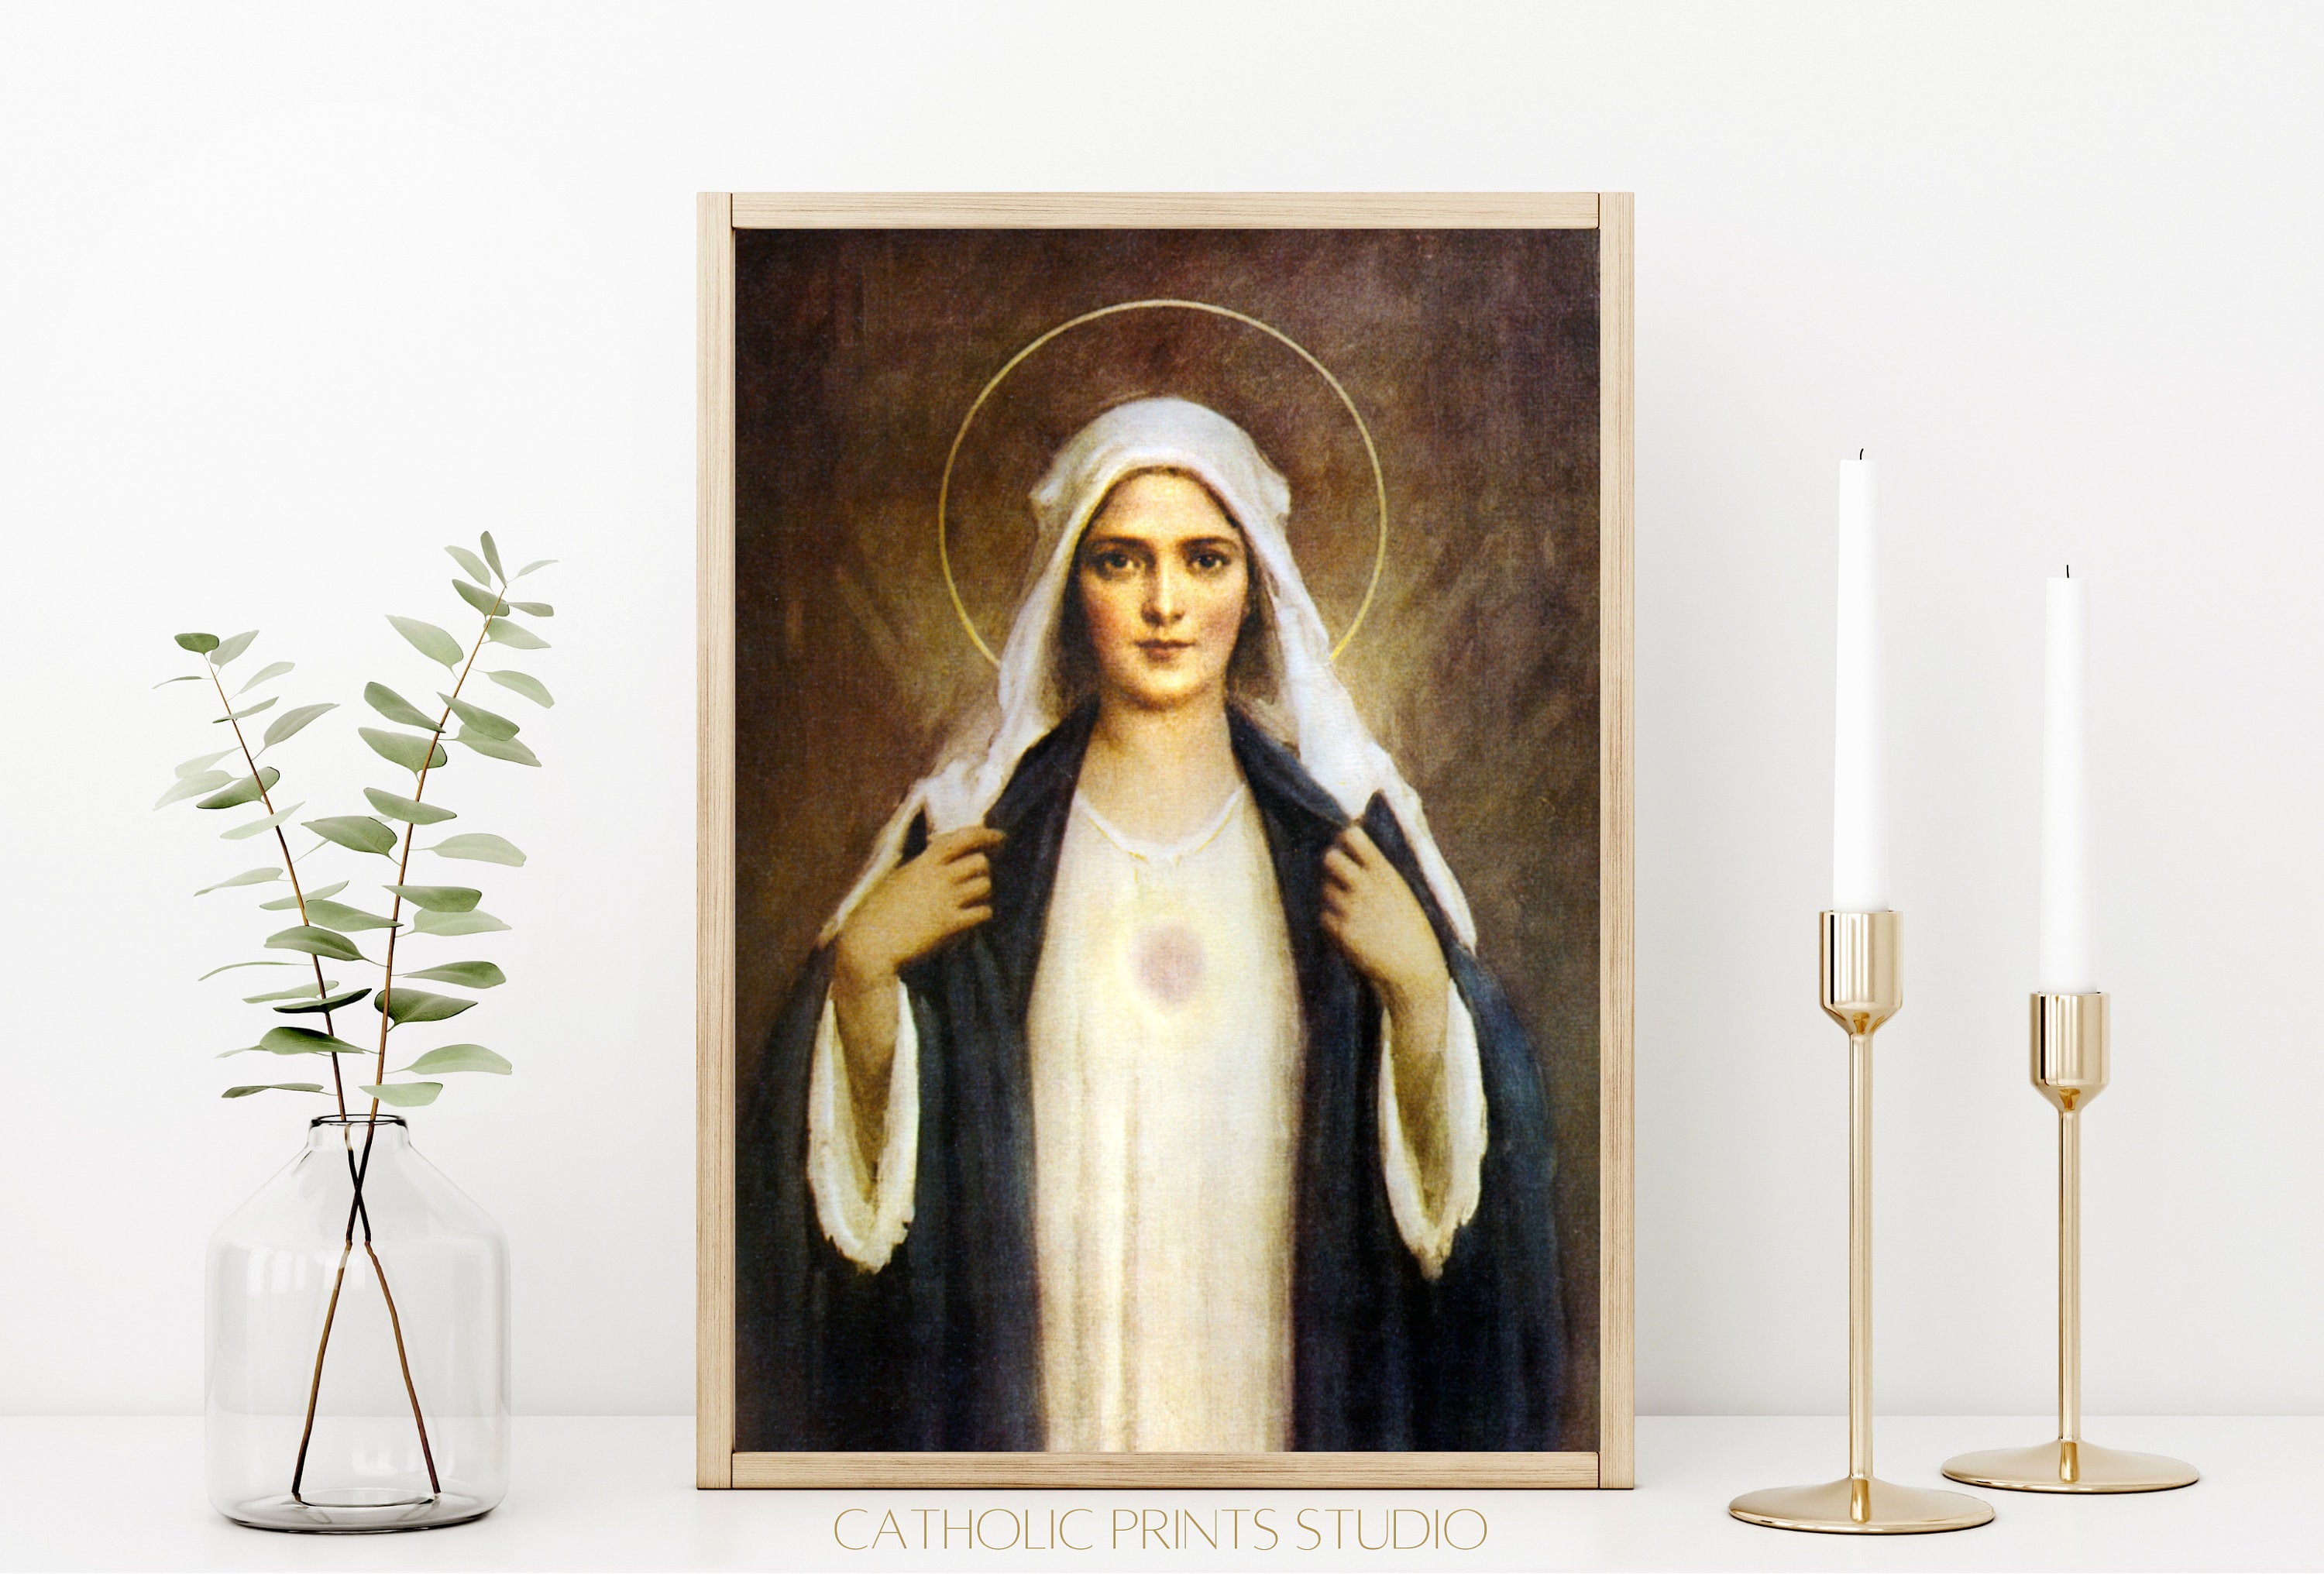 Sacred Heart of Jesus, Immaculate Heart of Mary and Chaste Heart of St.  Joseph Printable Image, Hearts of the Holy Family Catholic Print Art 